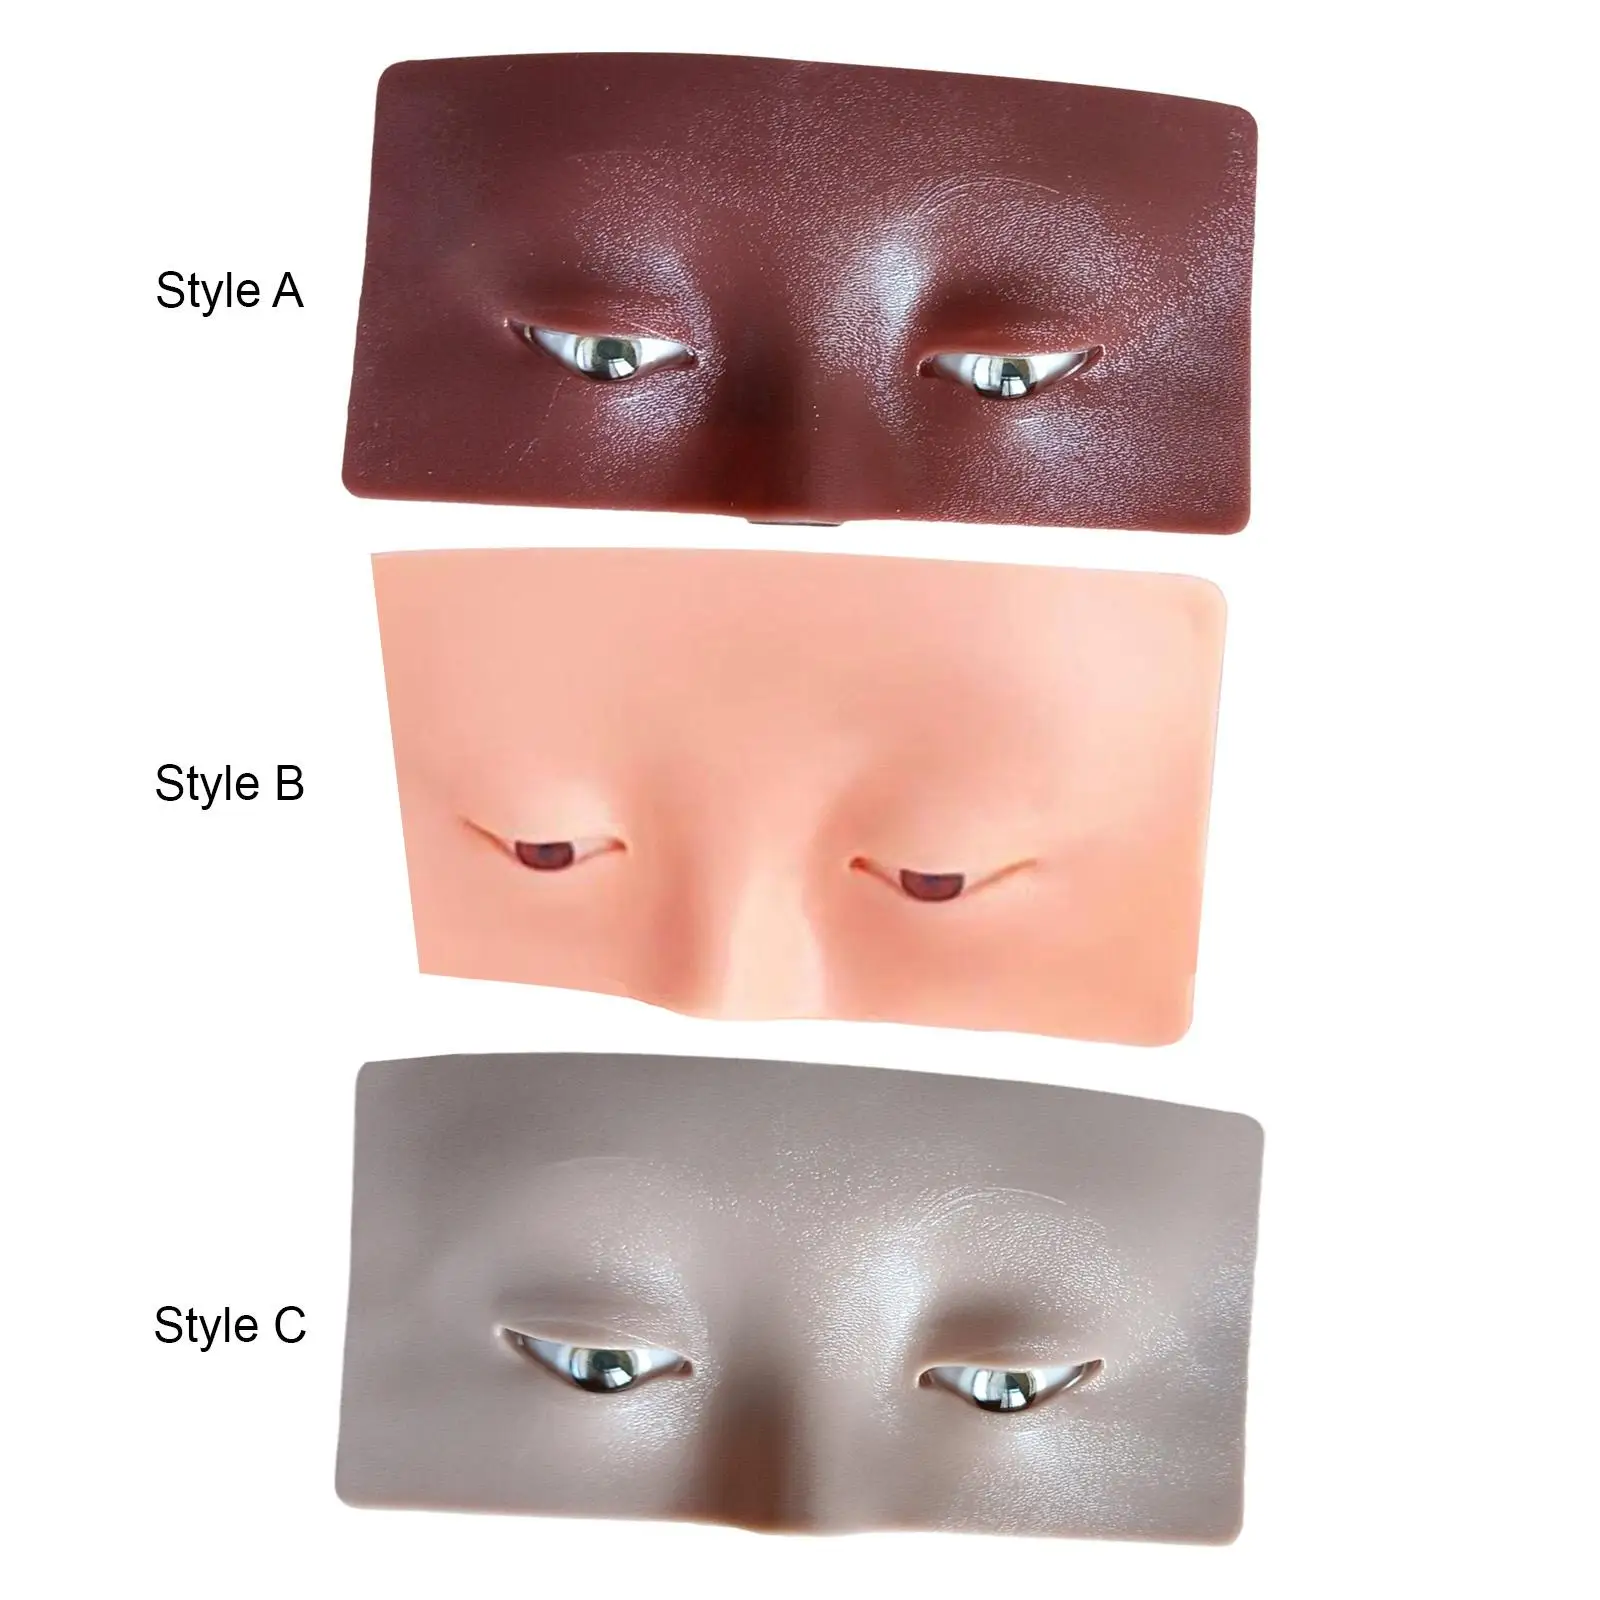 eye Makeup Practice Face 17x9cm Accessory Easy to Use Reusable for Makeup Training Cosmetologist Makeup Artists Beginners